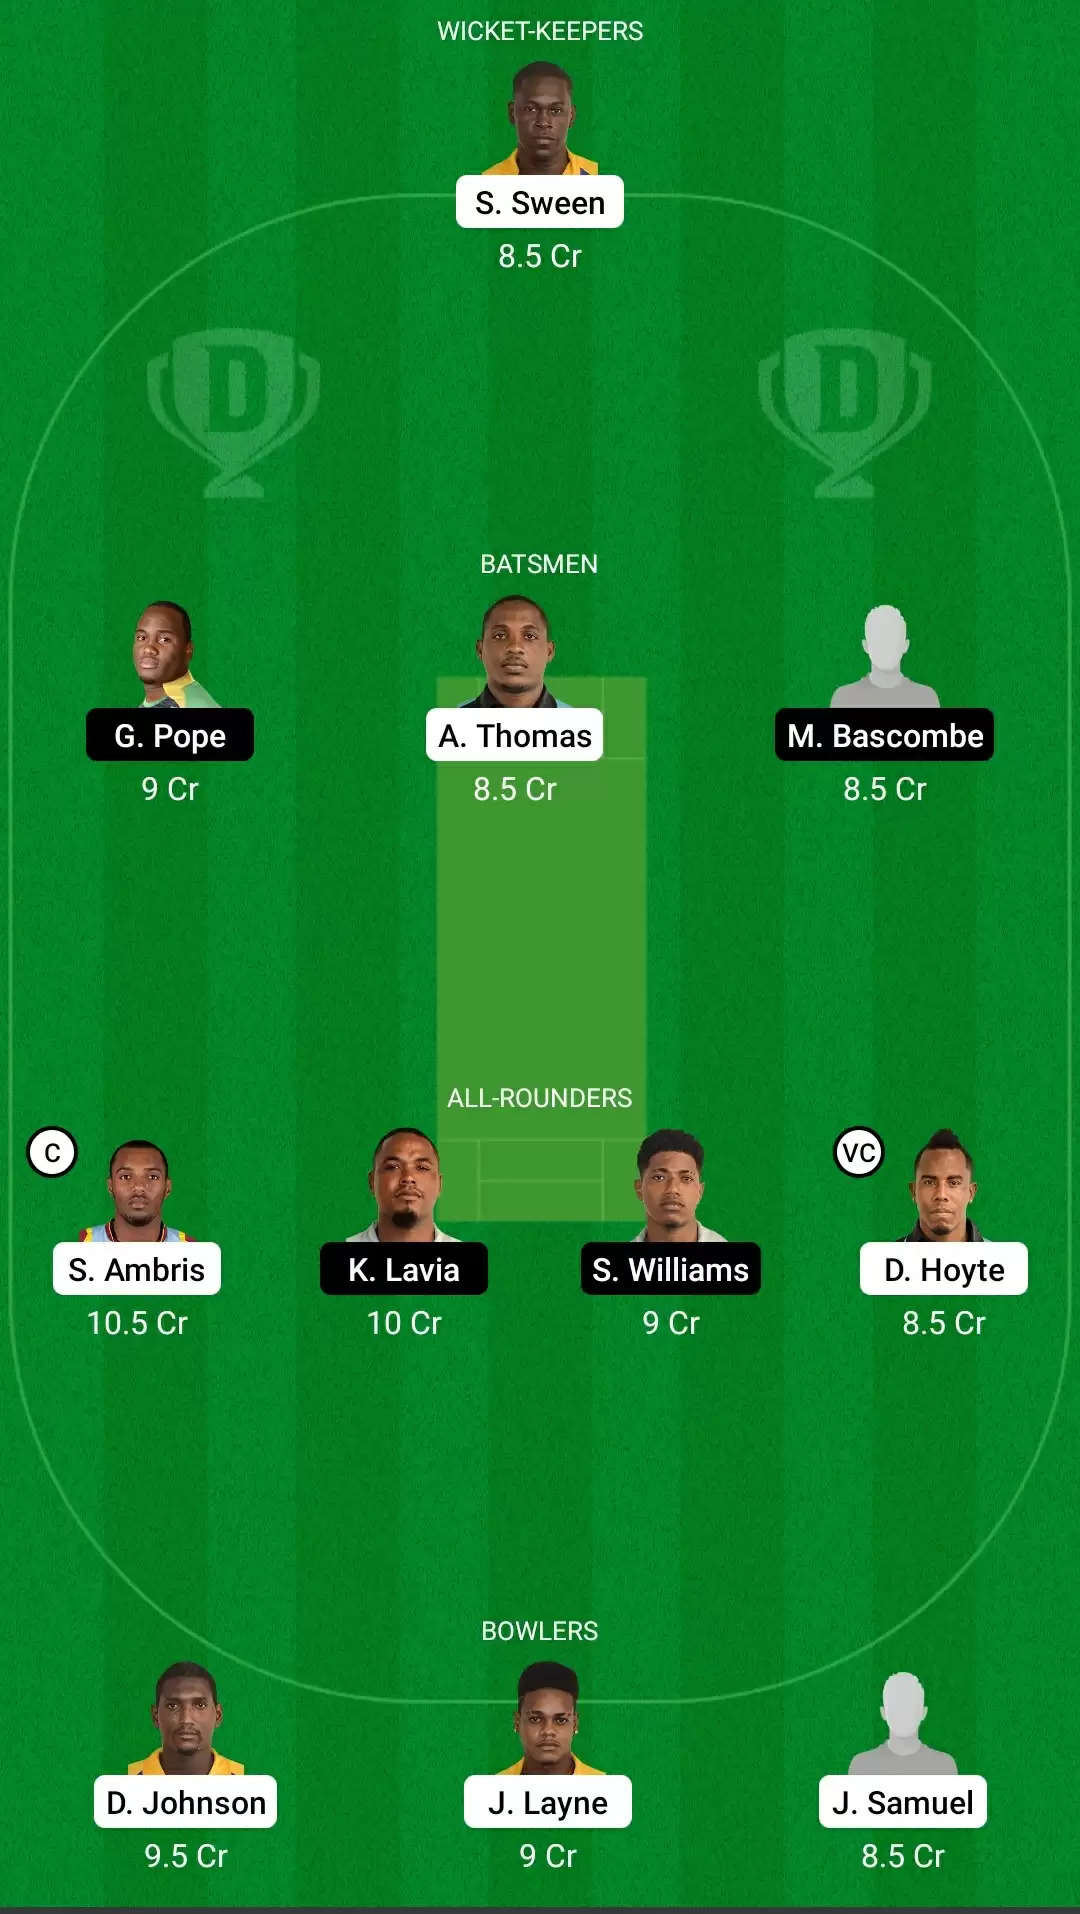 Vincy Premier League 2021, Match 13: SPB vs FCS Dream11 Prediction, Fantasy Cricket Tips, Team, Playing 11, Pitch Report, Weather Conditions and Injury Update